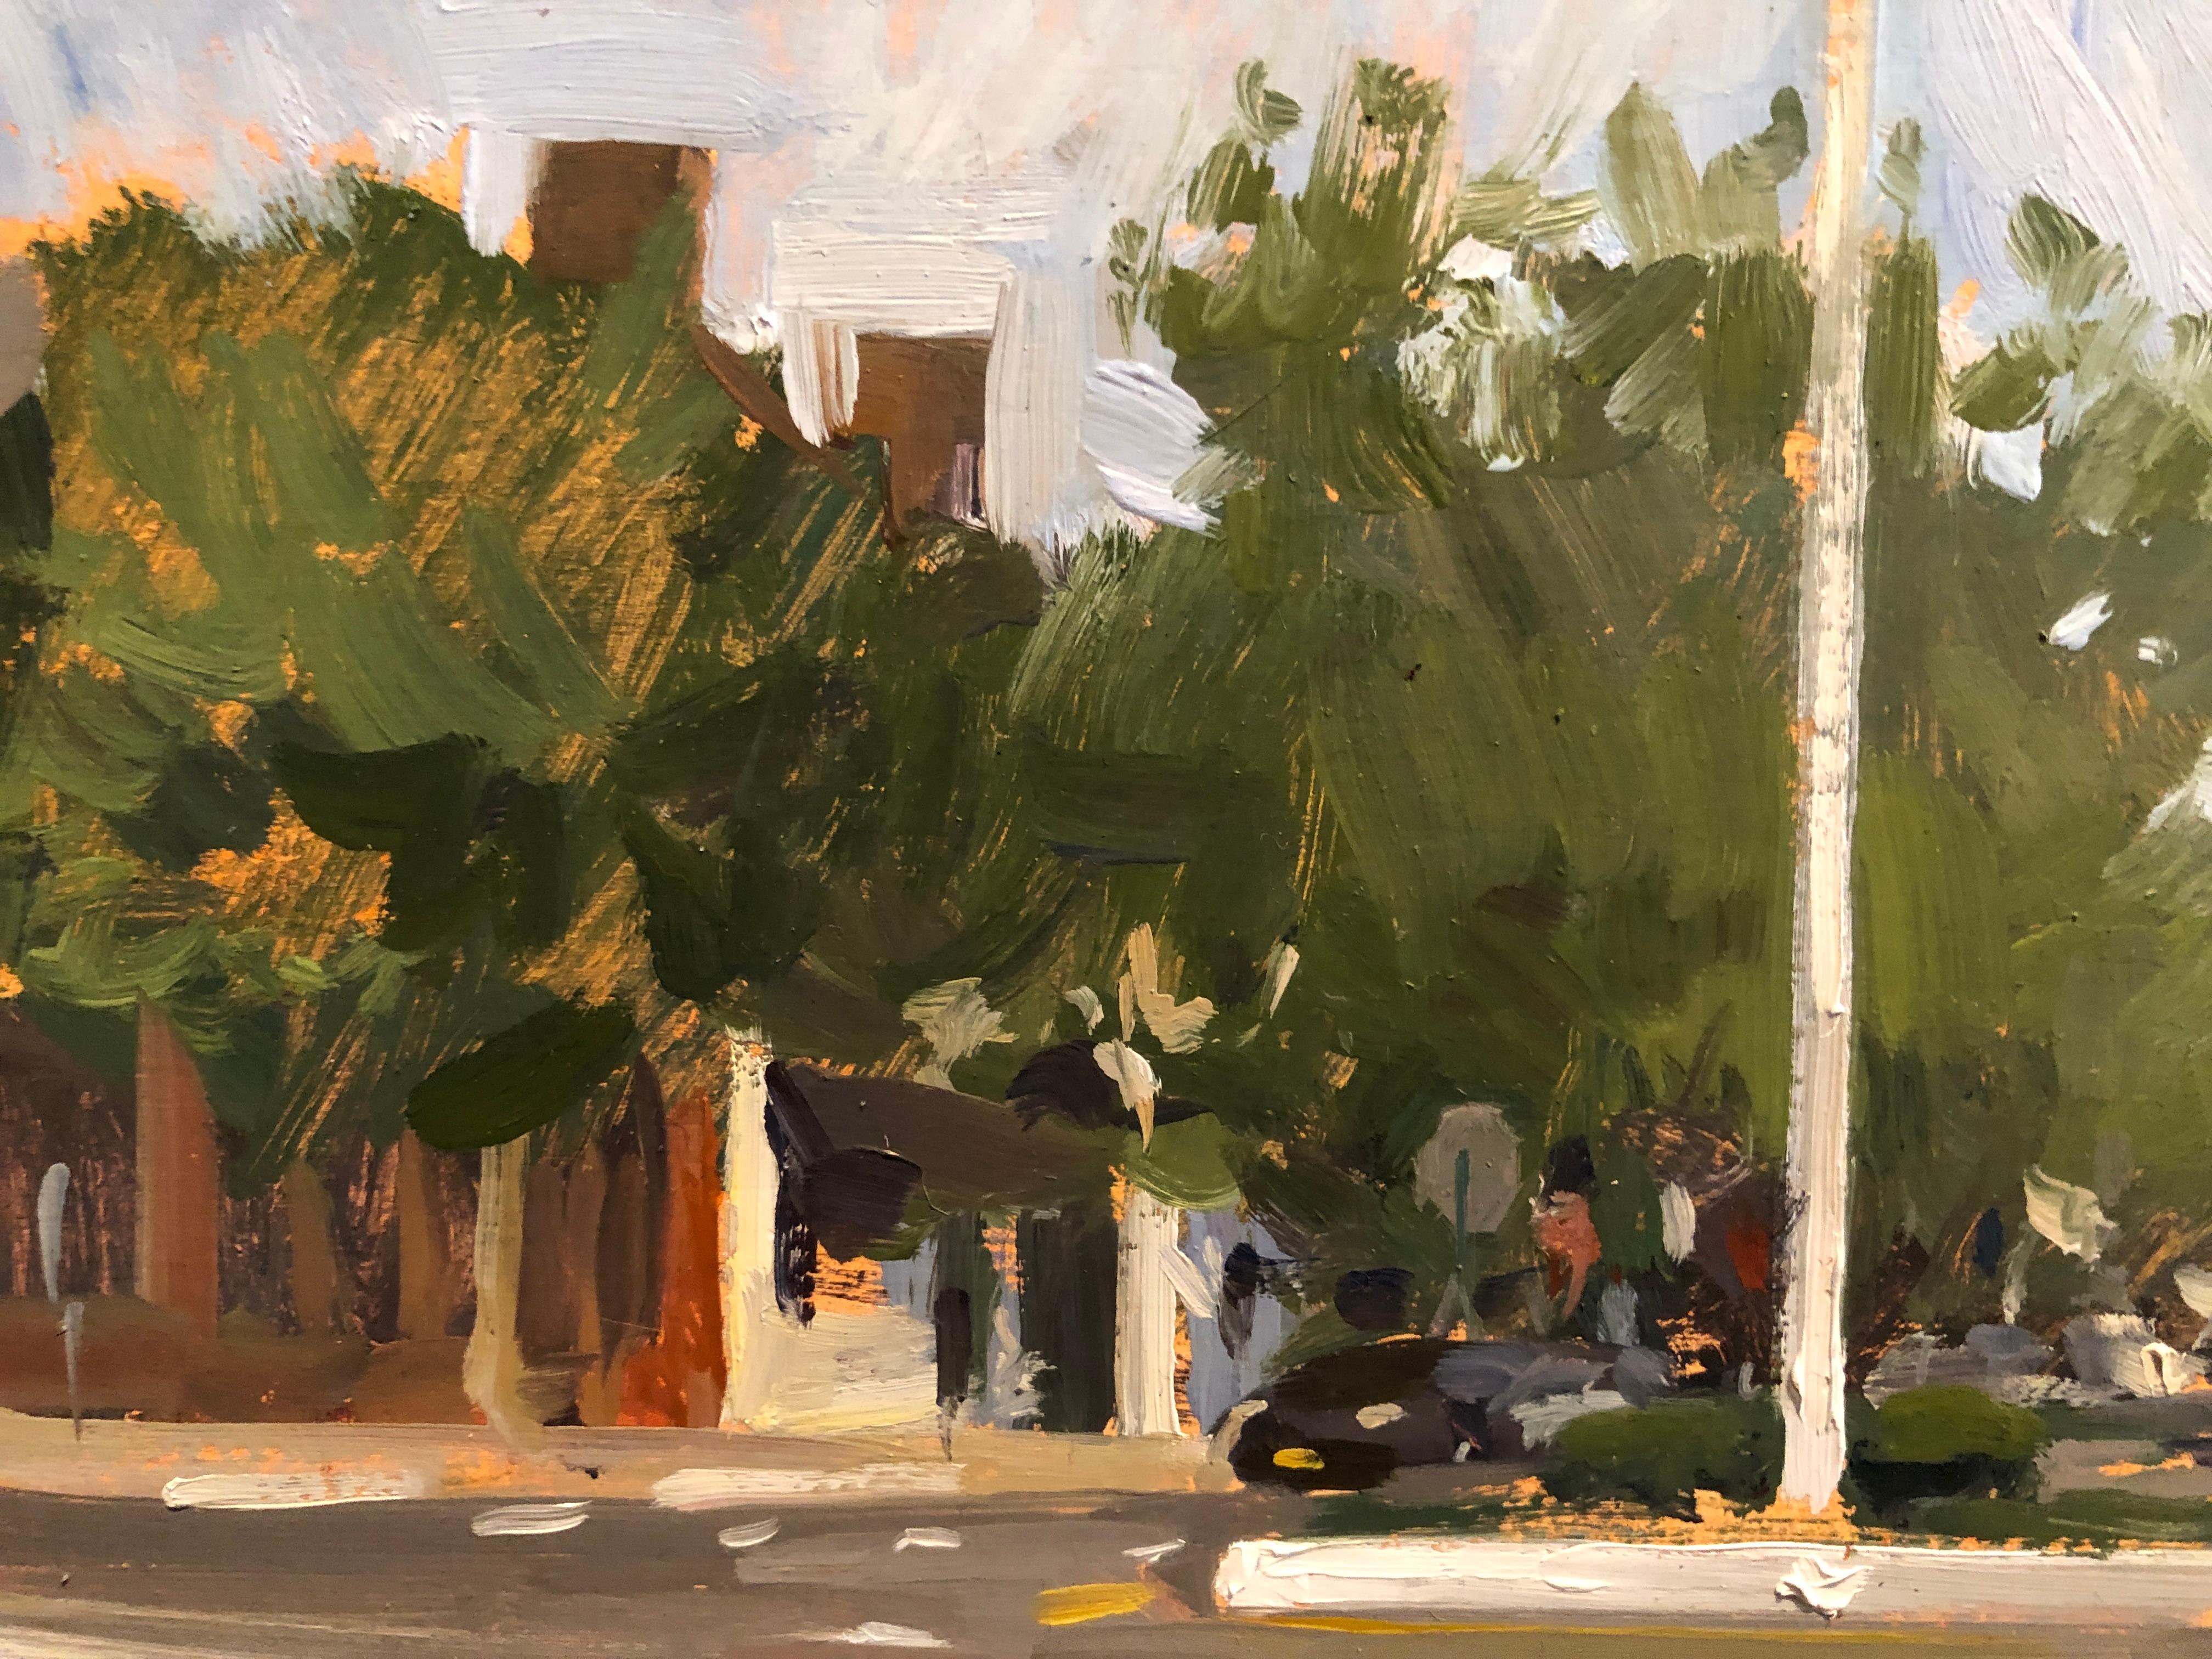 Sag Harbor Crosswalk - Gray Figurative Painting by Marc Dalessio